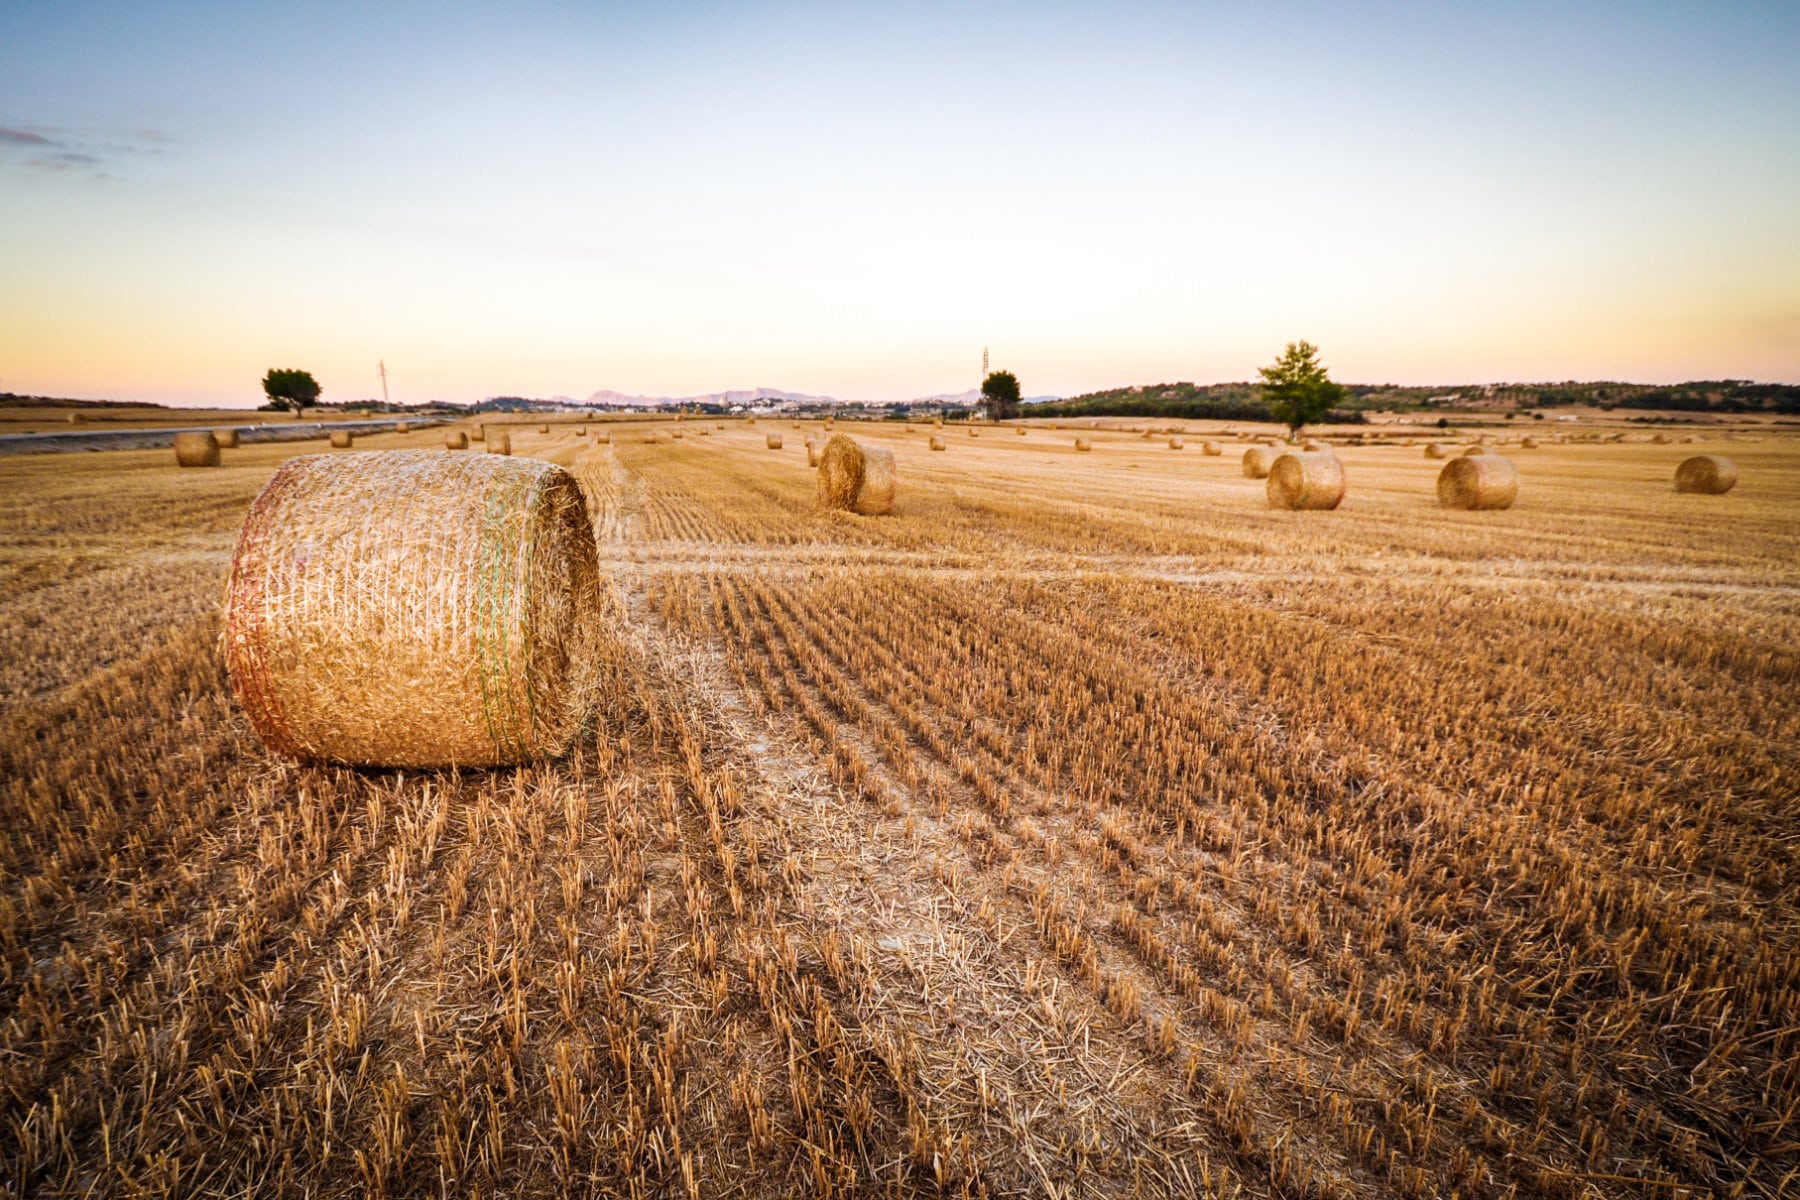 Round and square bales